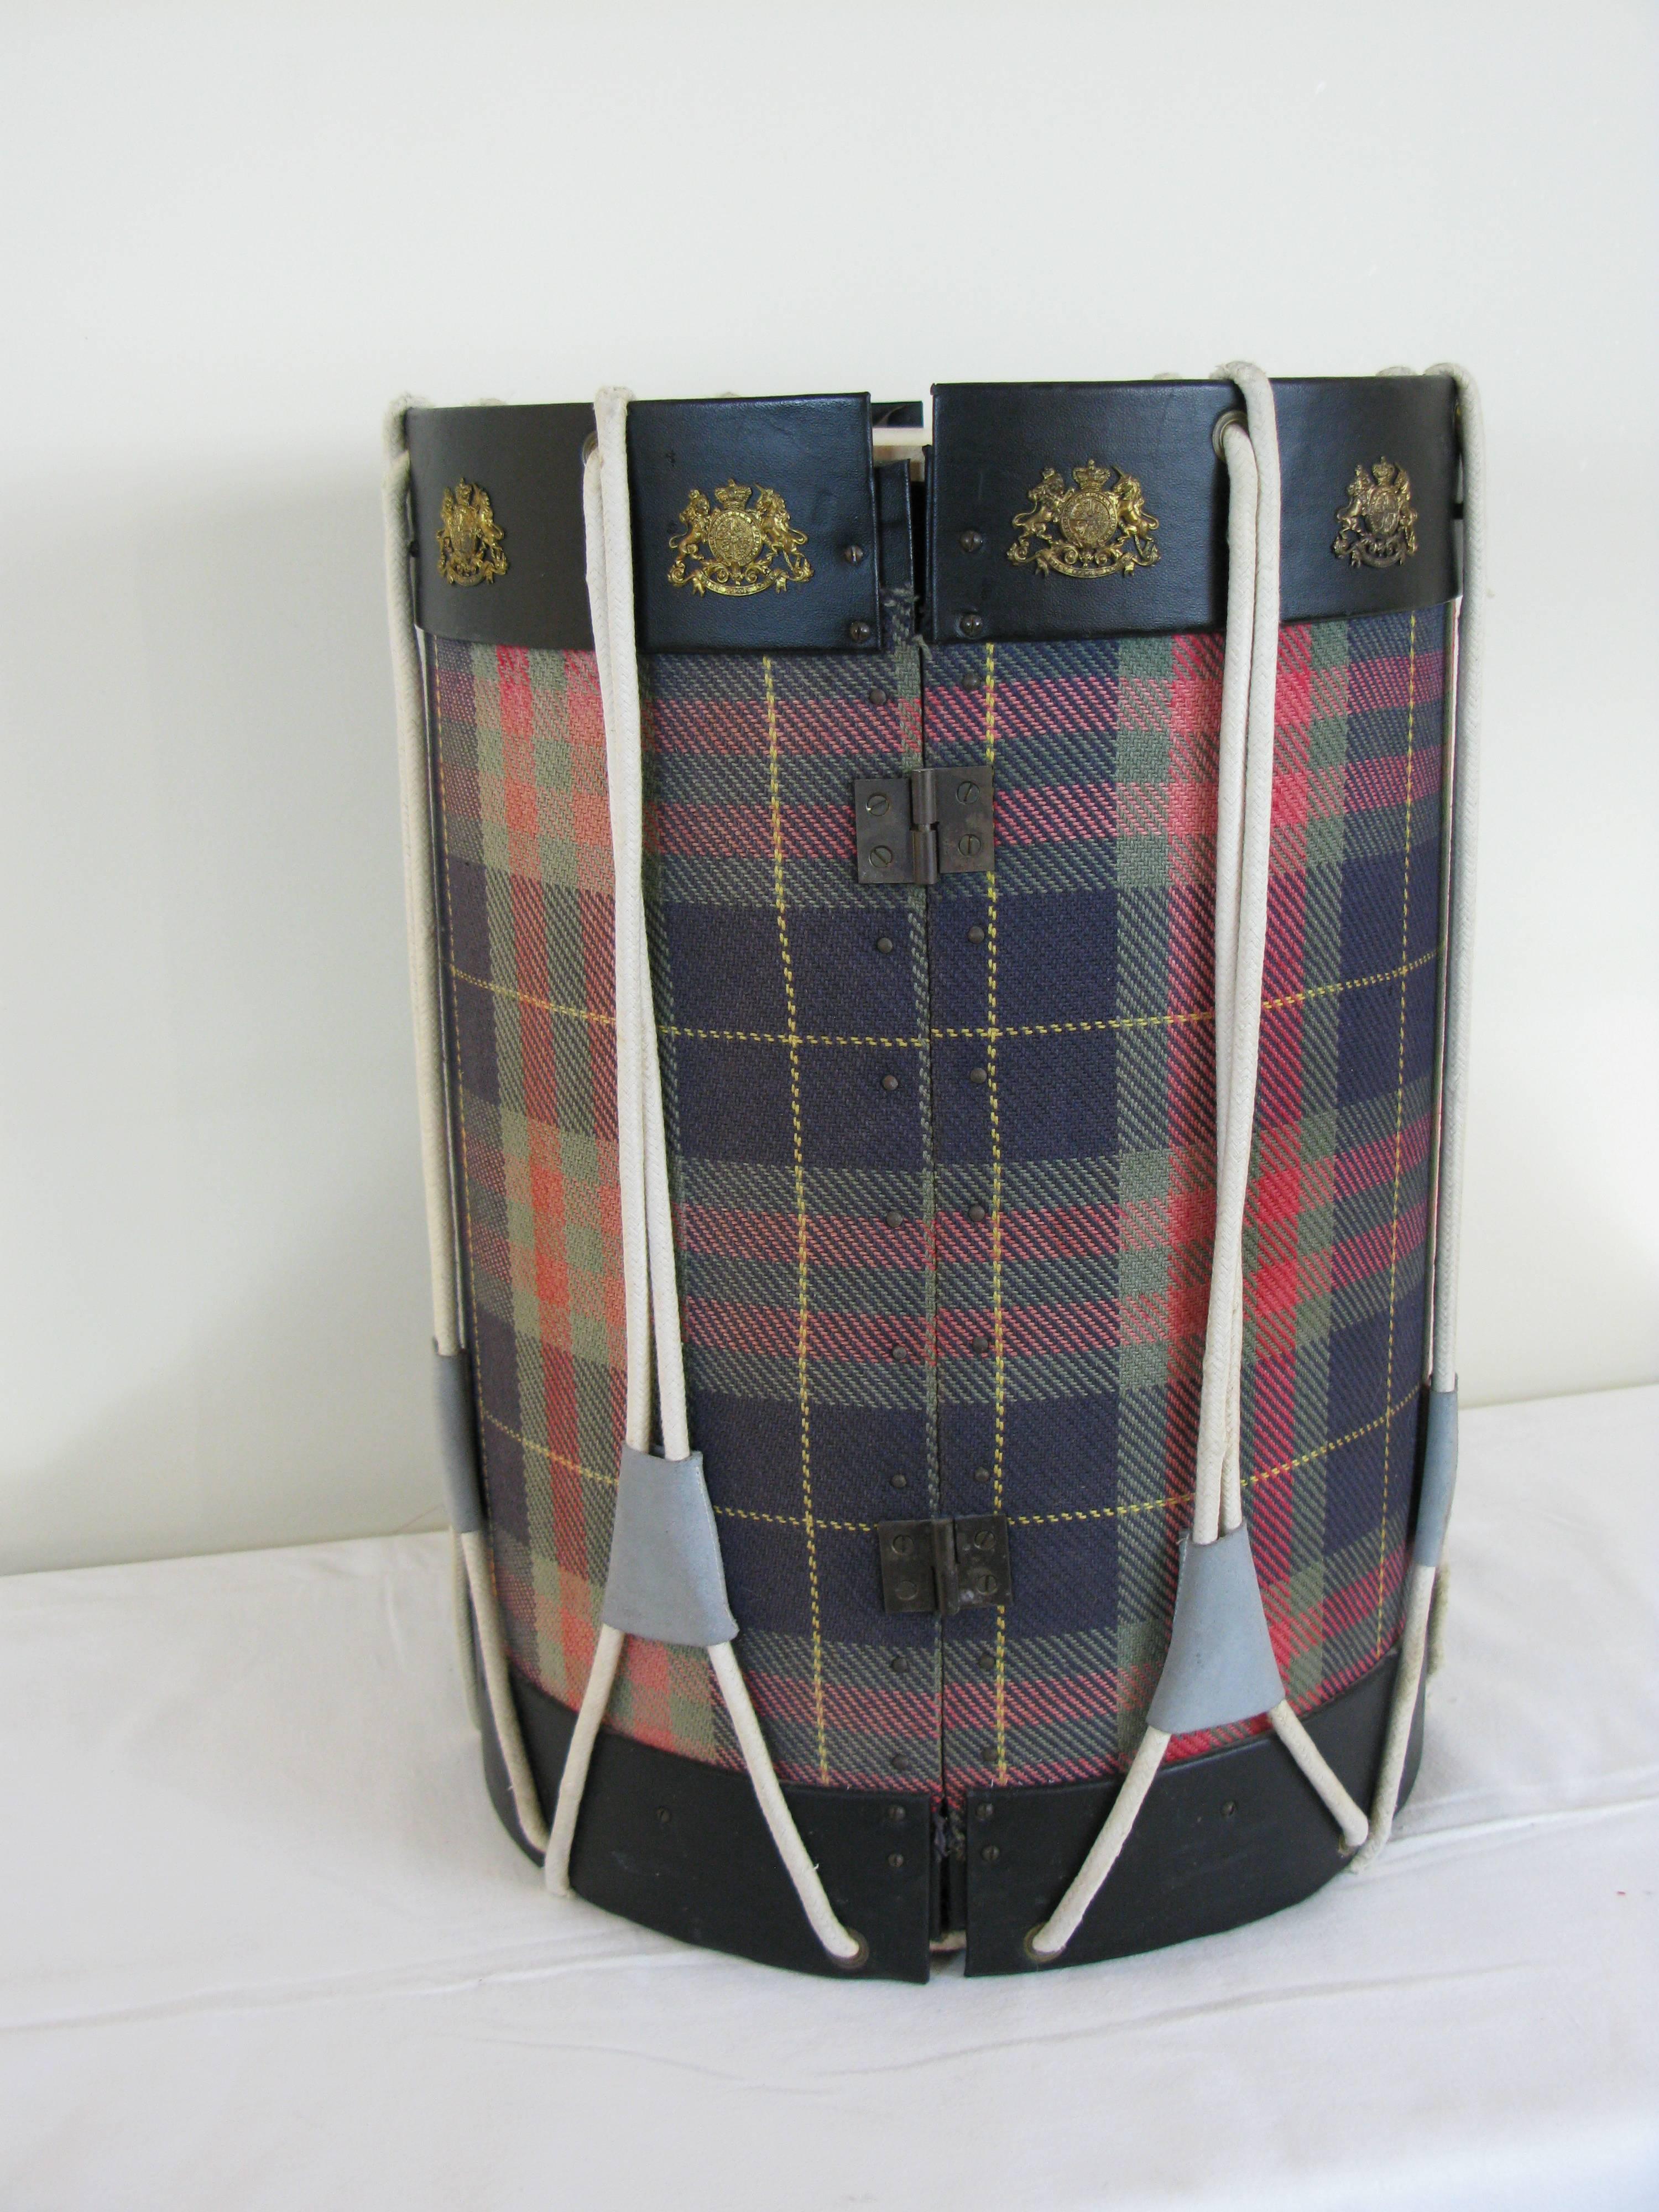 Bar unit in the shape of a drum covered with plaid fabric and black imitation leather wrapped around the edge and off white on the top.
Small cords depart from top to bottom of the cabinet.
Brass patterns are arranged on the bar top.
Two double